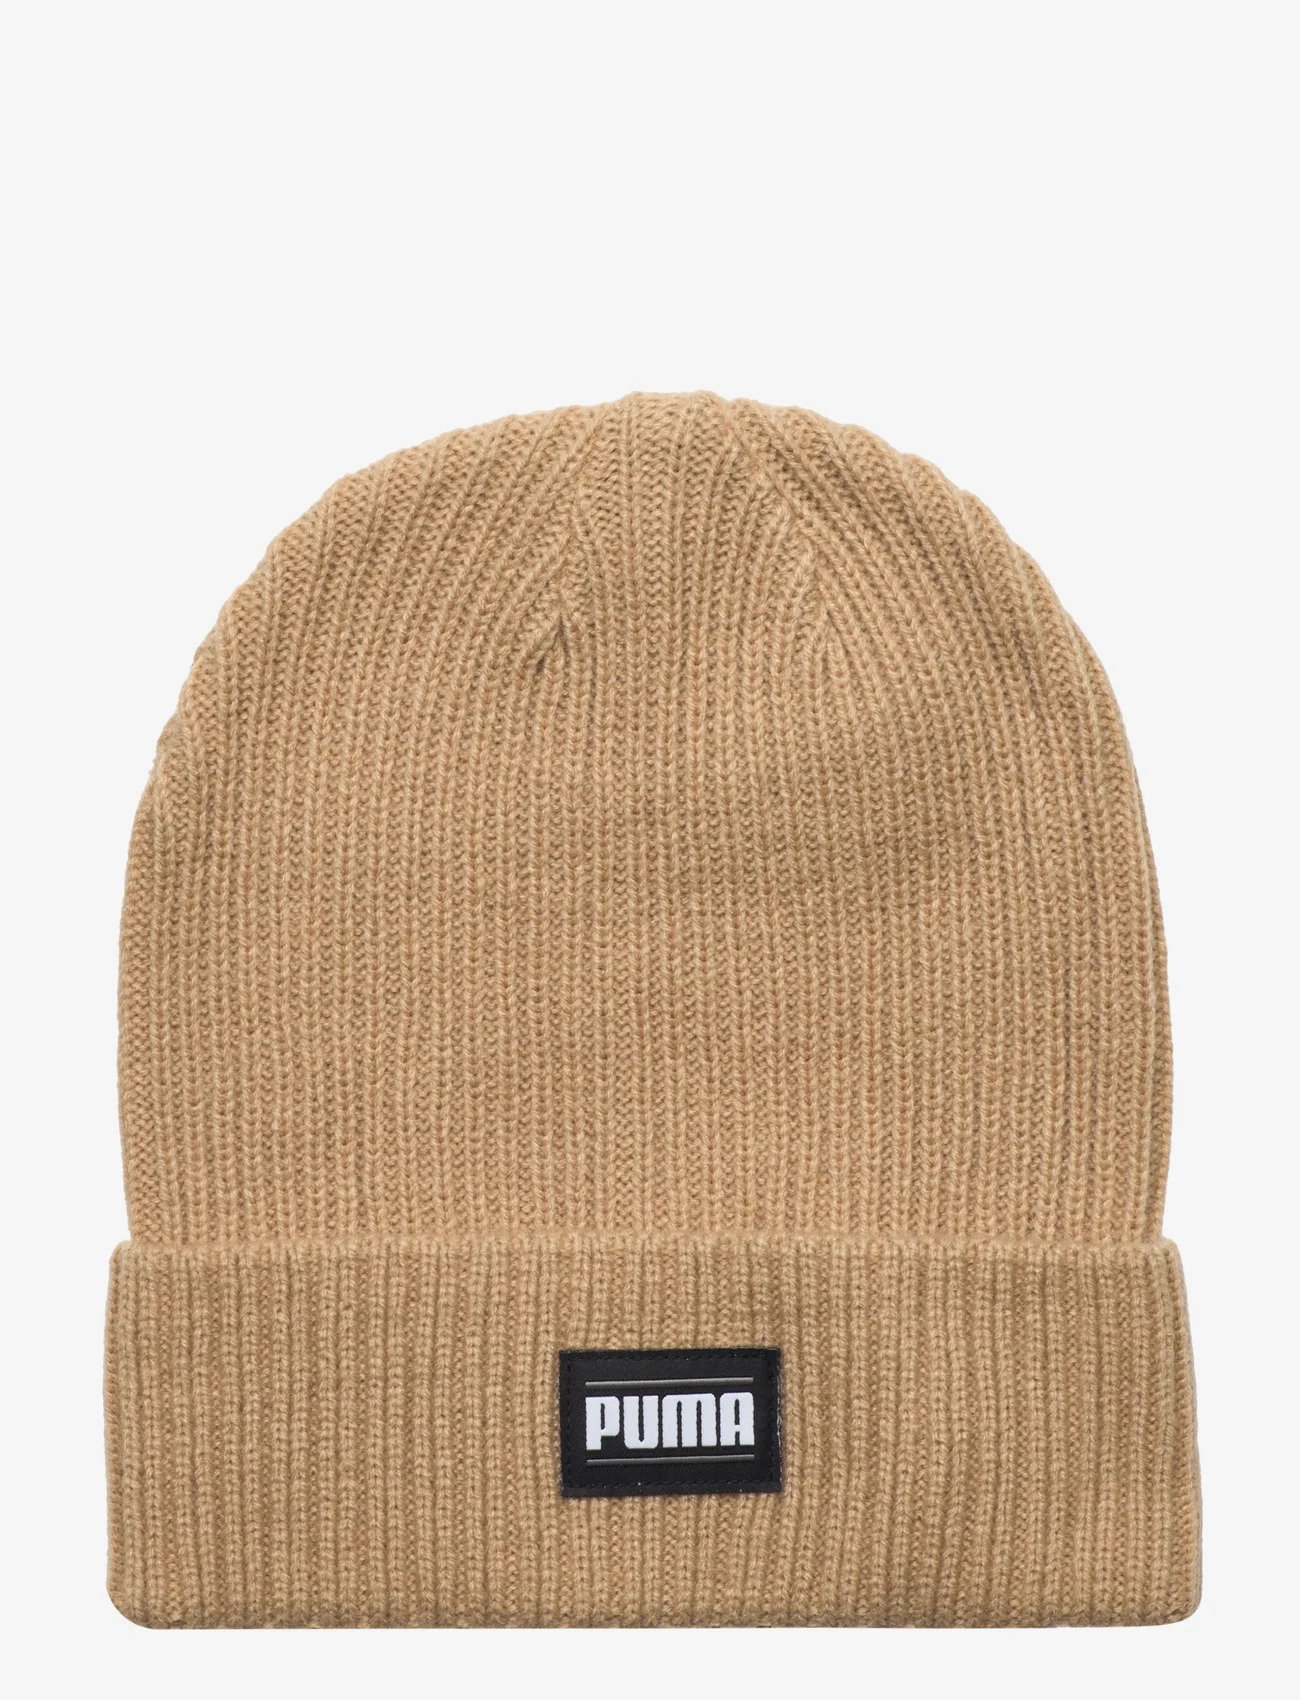 PUMA - Ribbed Classic Cuff Beanie - lowest prices - sand dune - 0